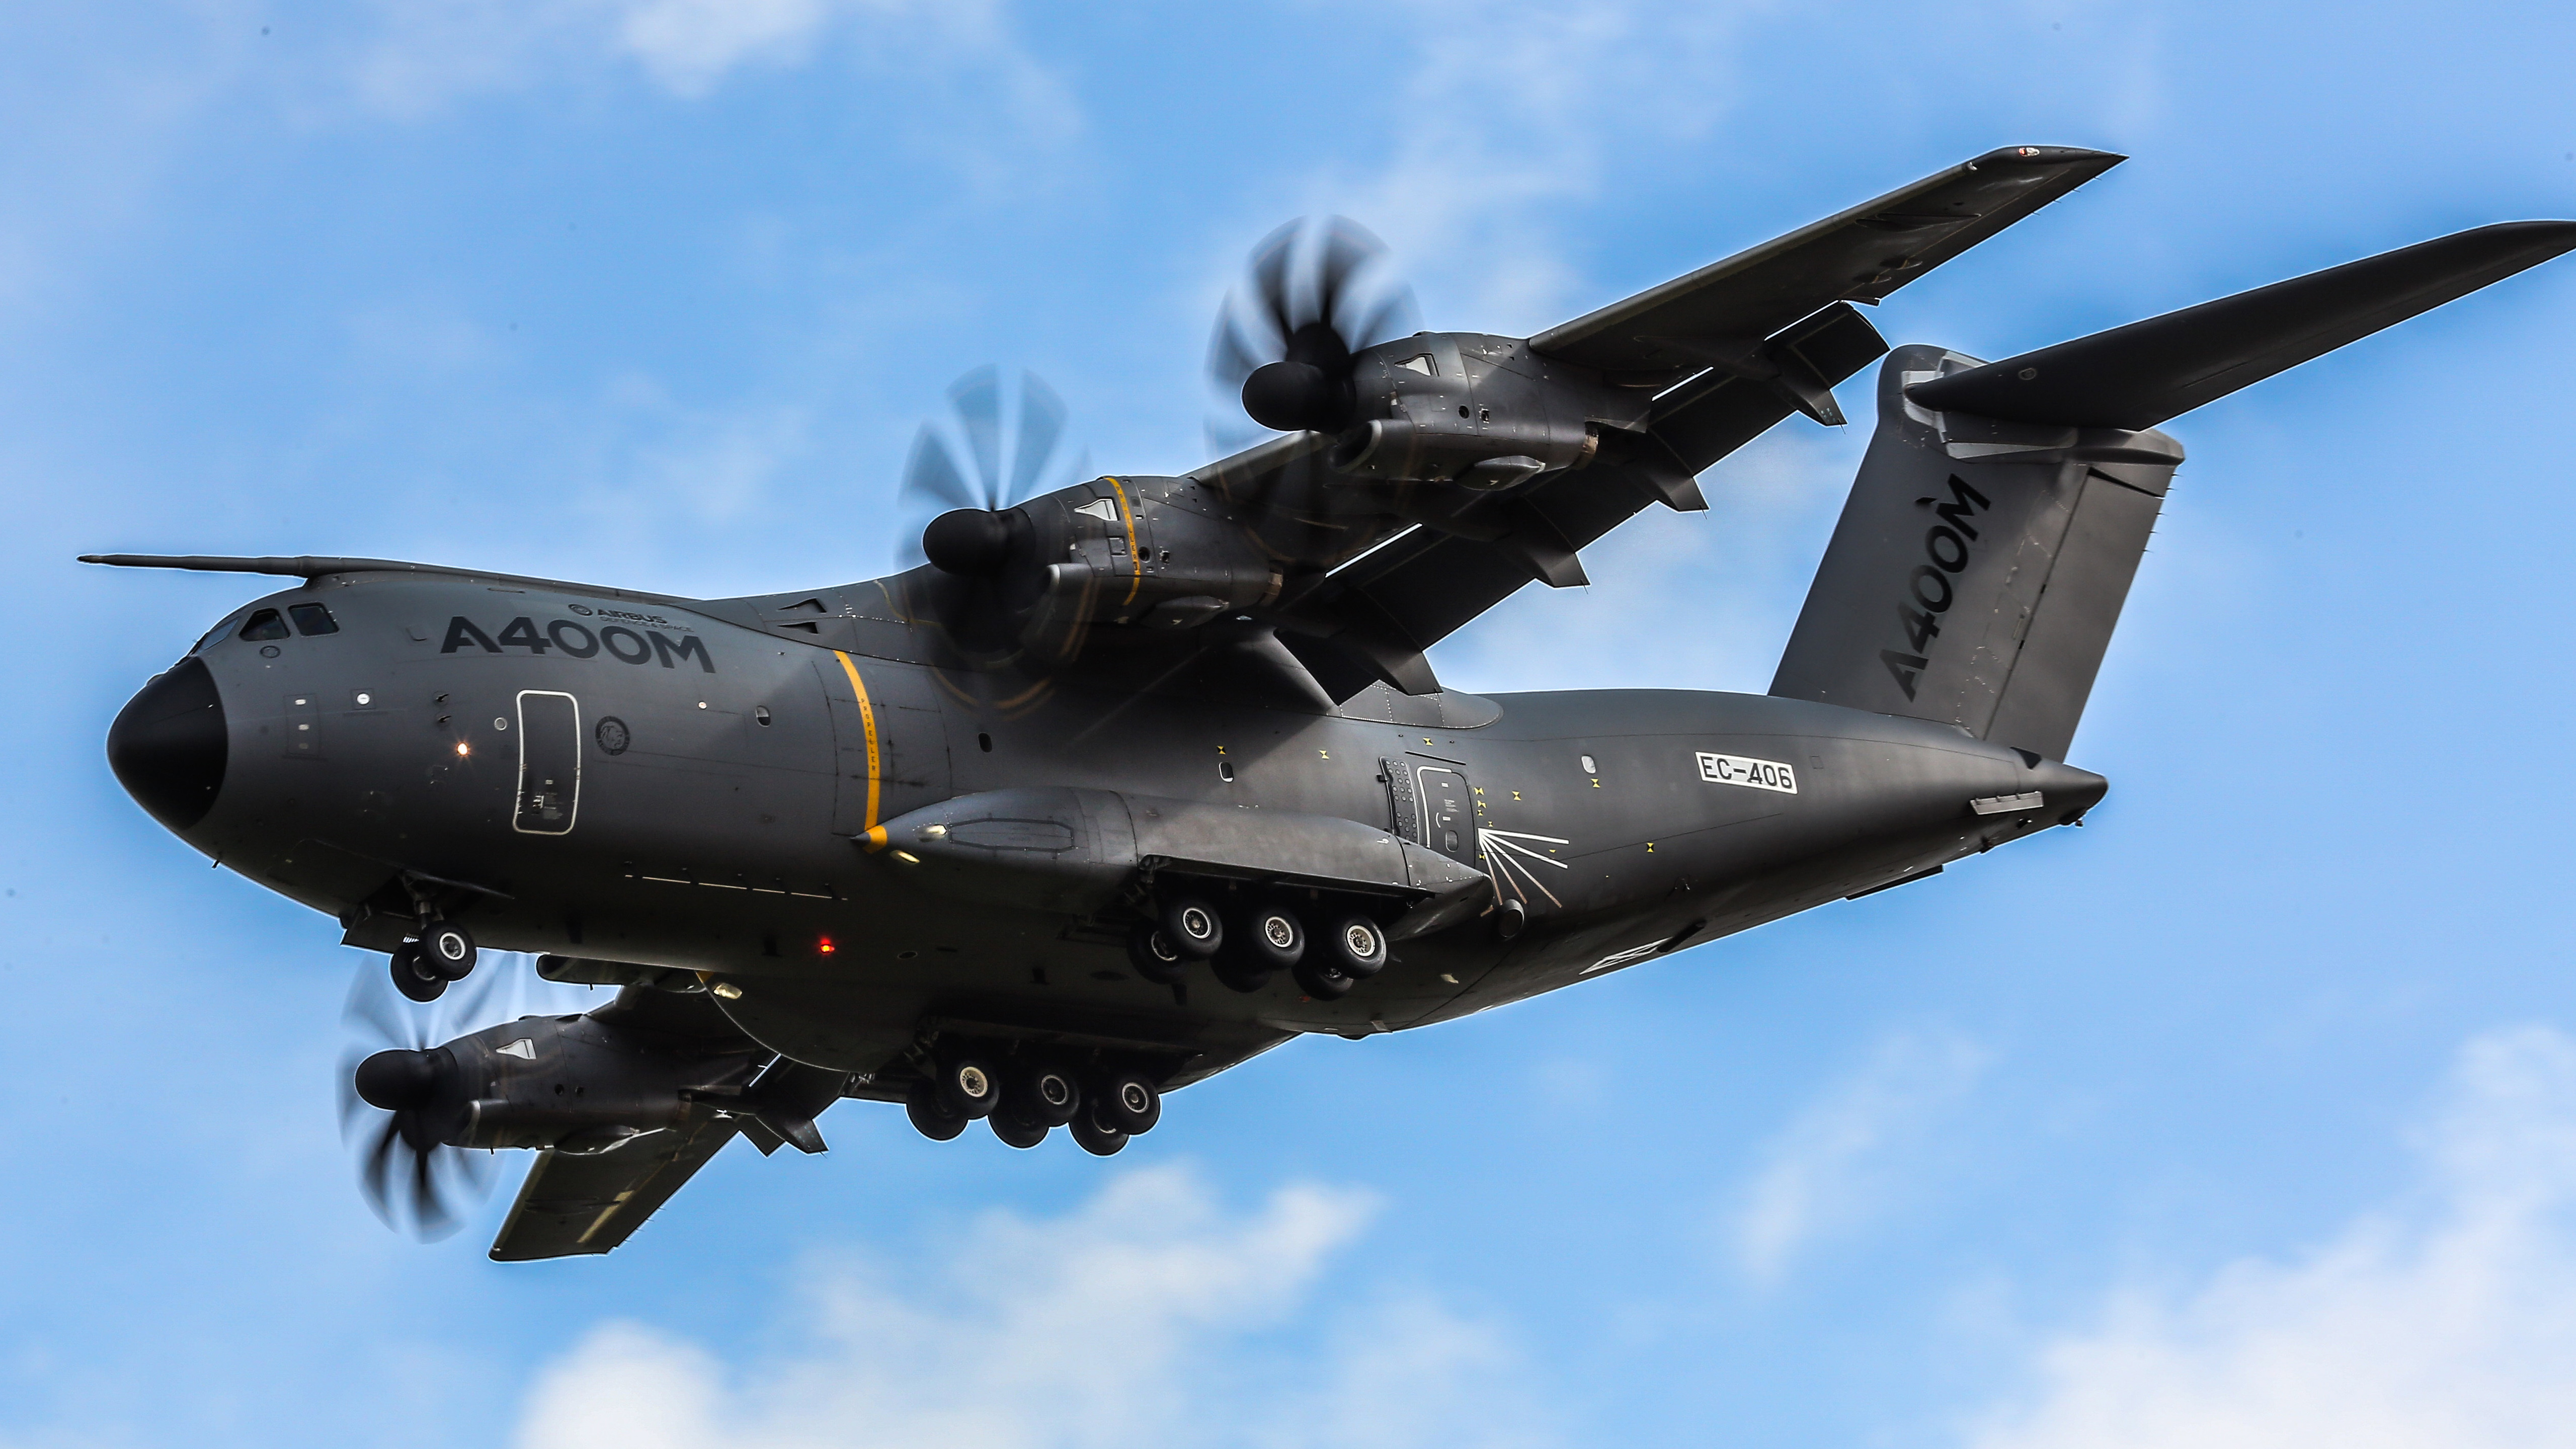 Airbus A400M Atlas Military Transport Aircraft9442815661 - Airbus A400M Atlas Military Transport Aircraft - Transport, Military, EC665, Atlas, aircraft, Airbus, A400M